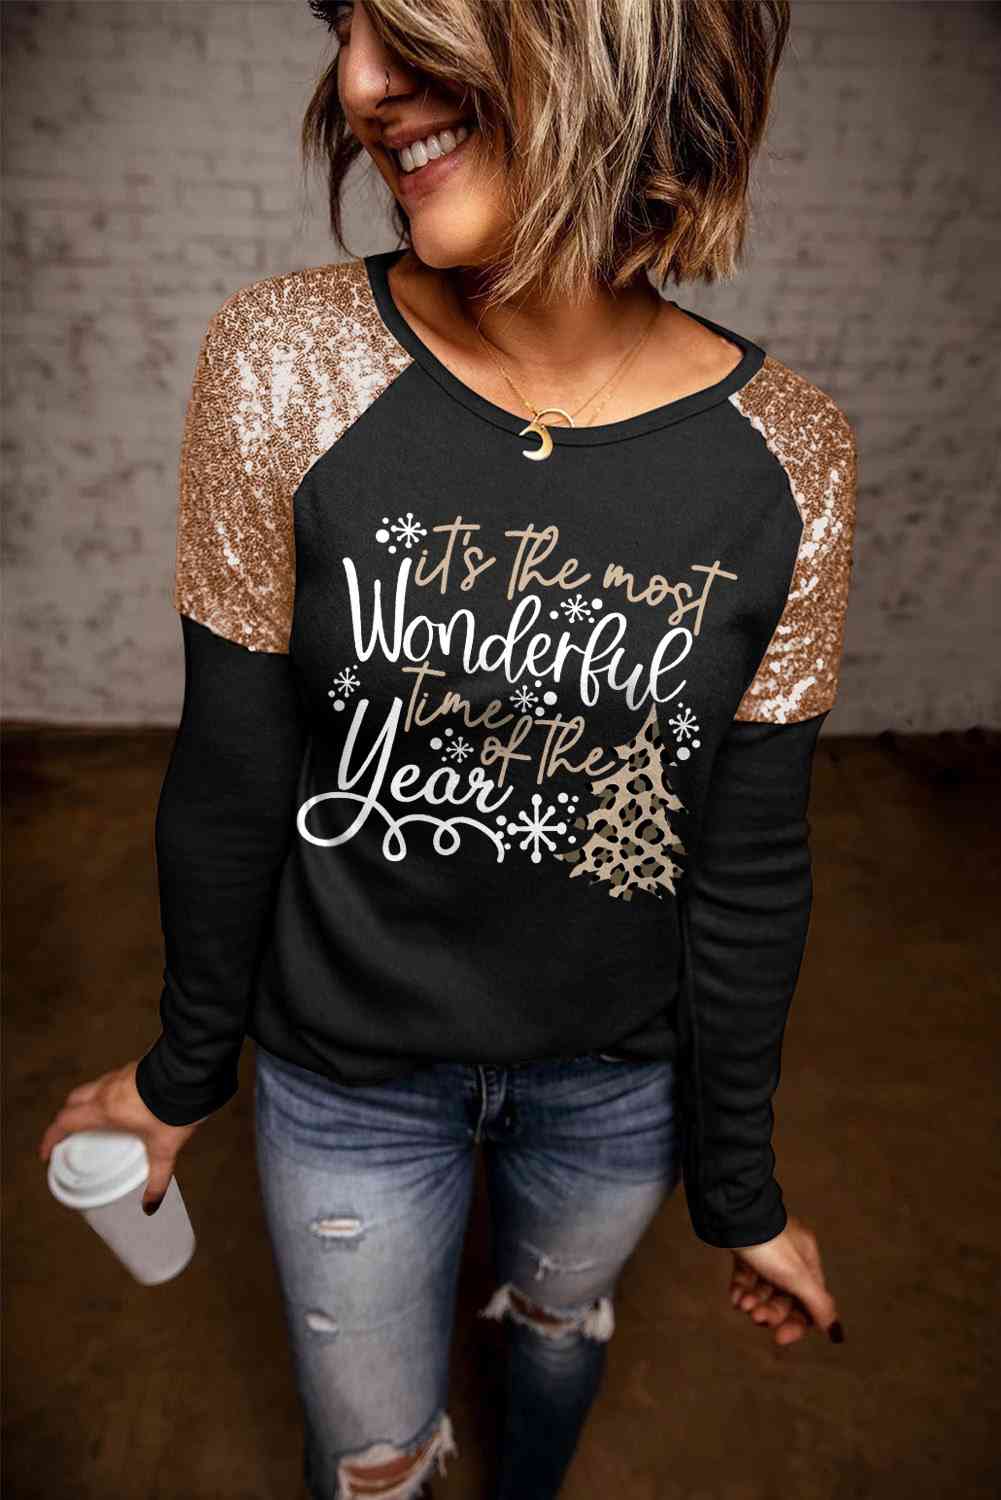 Christmas Sequin Slogan Graphic T-Shirt free shipping -Oh Em Gee Boutique